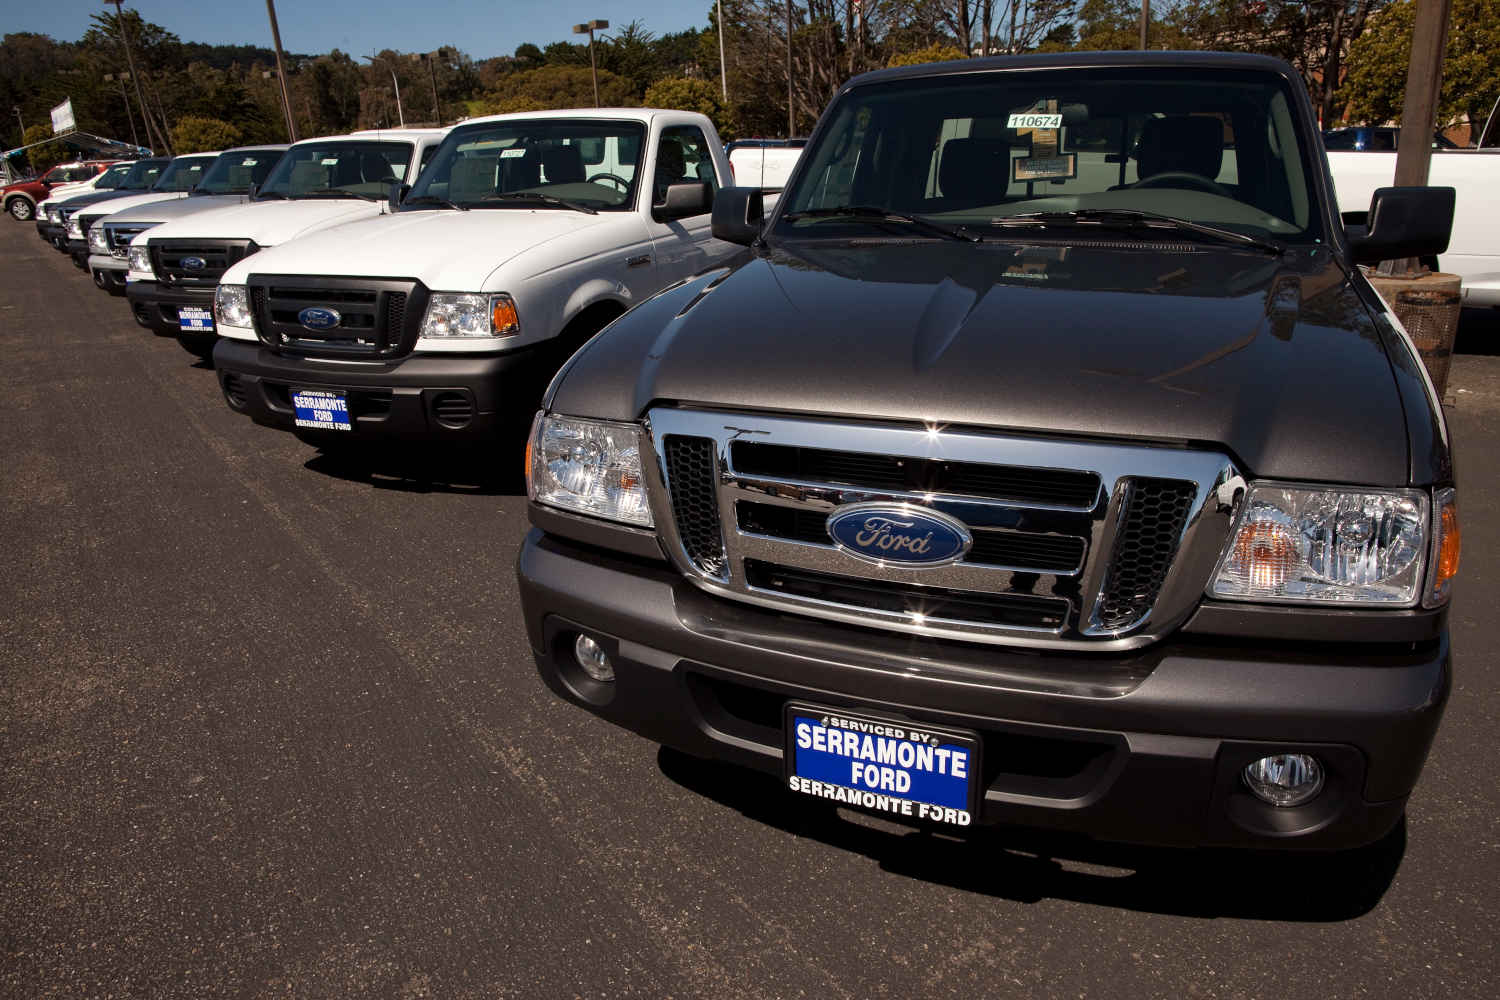 The best 2011 pickup trucks include this Ford Ranger